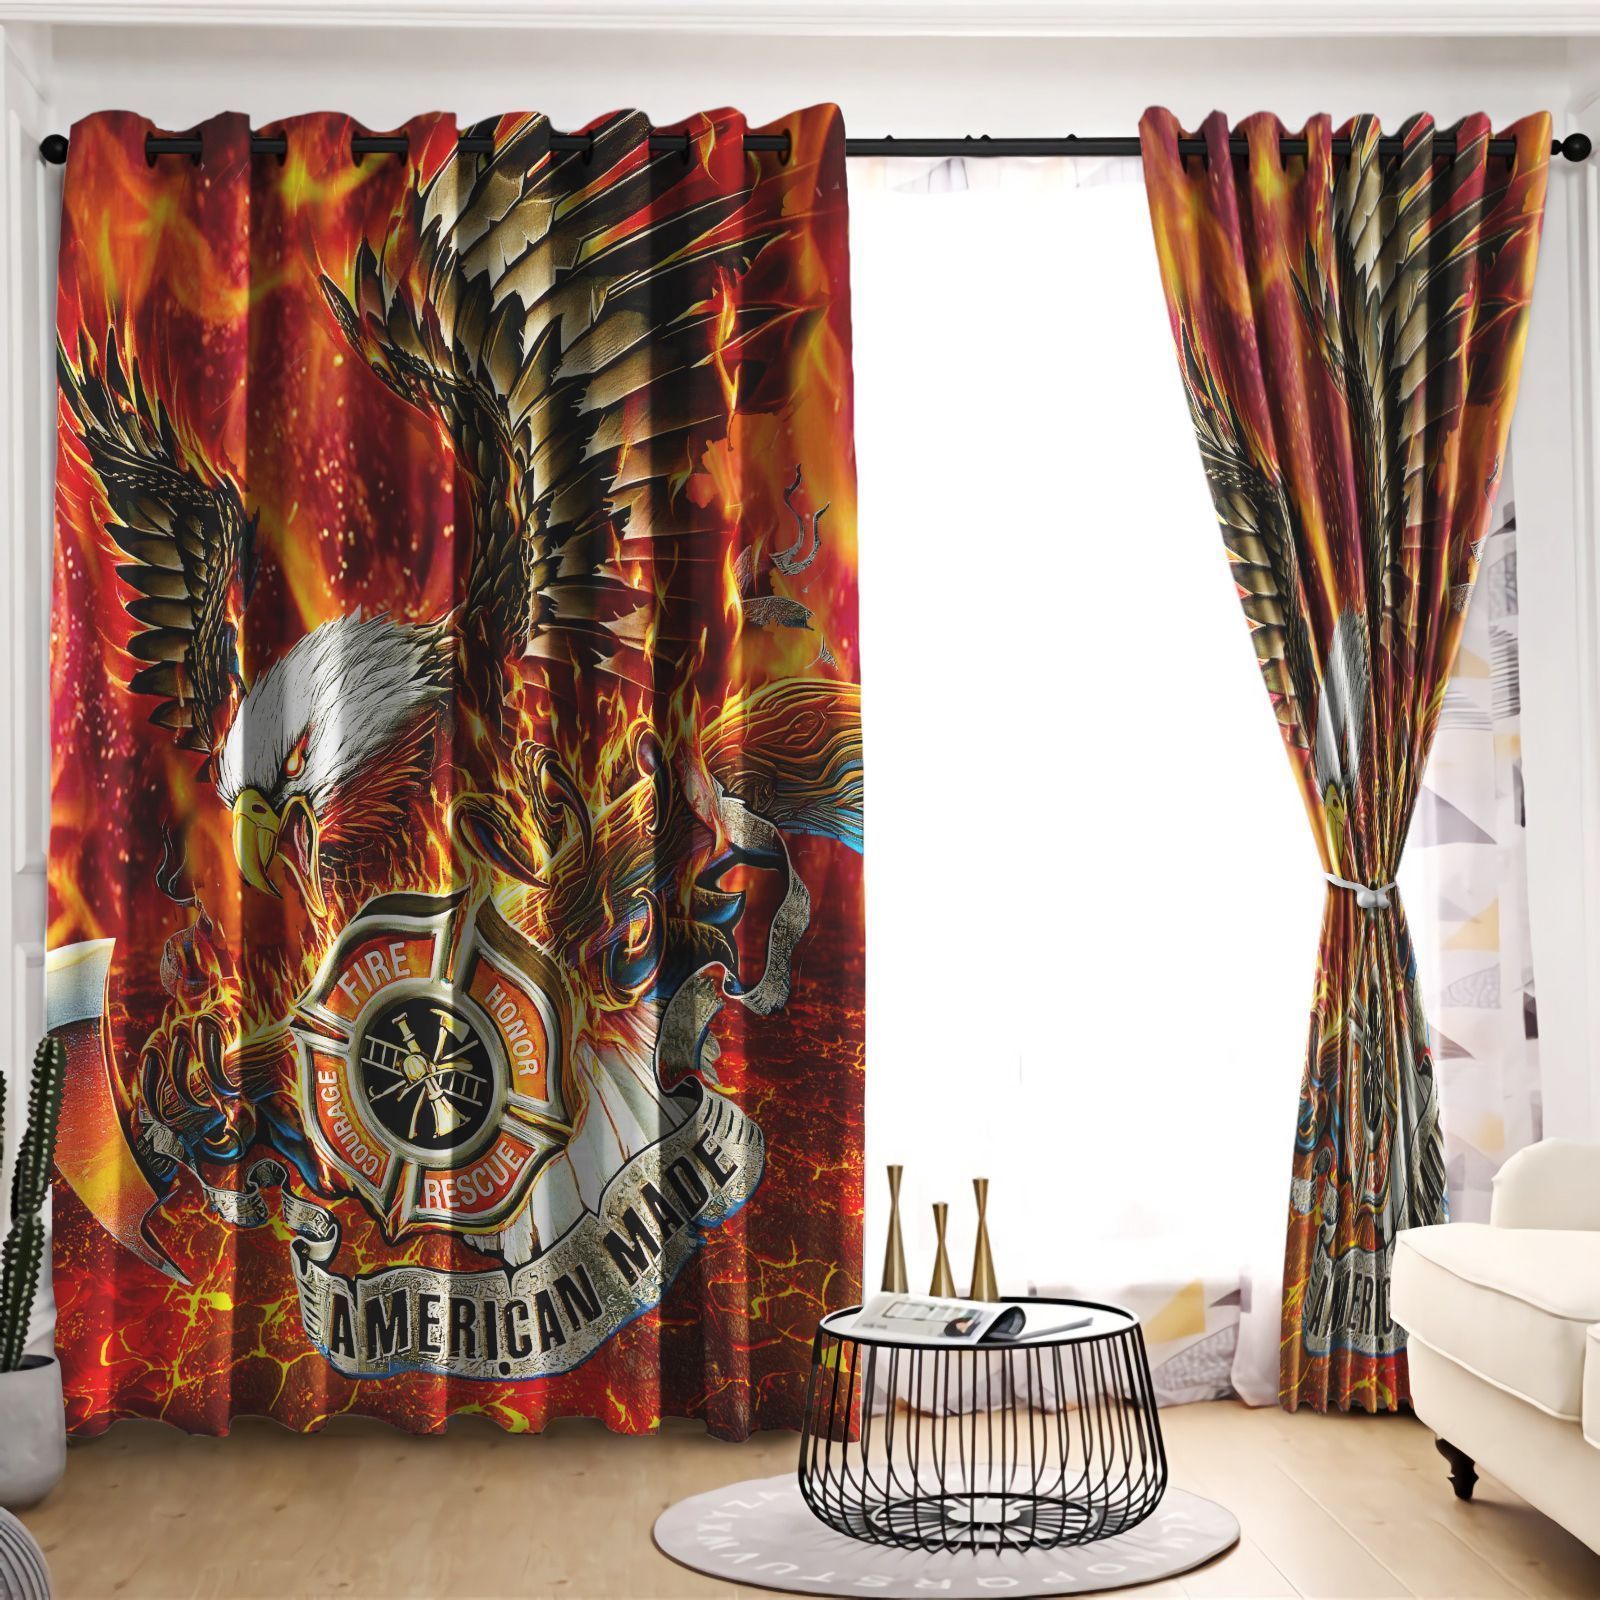 firefighter american made eagle printed window curtain home decor 5757